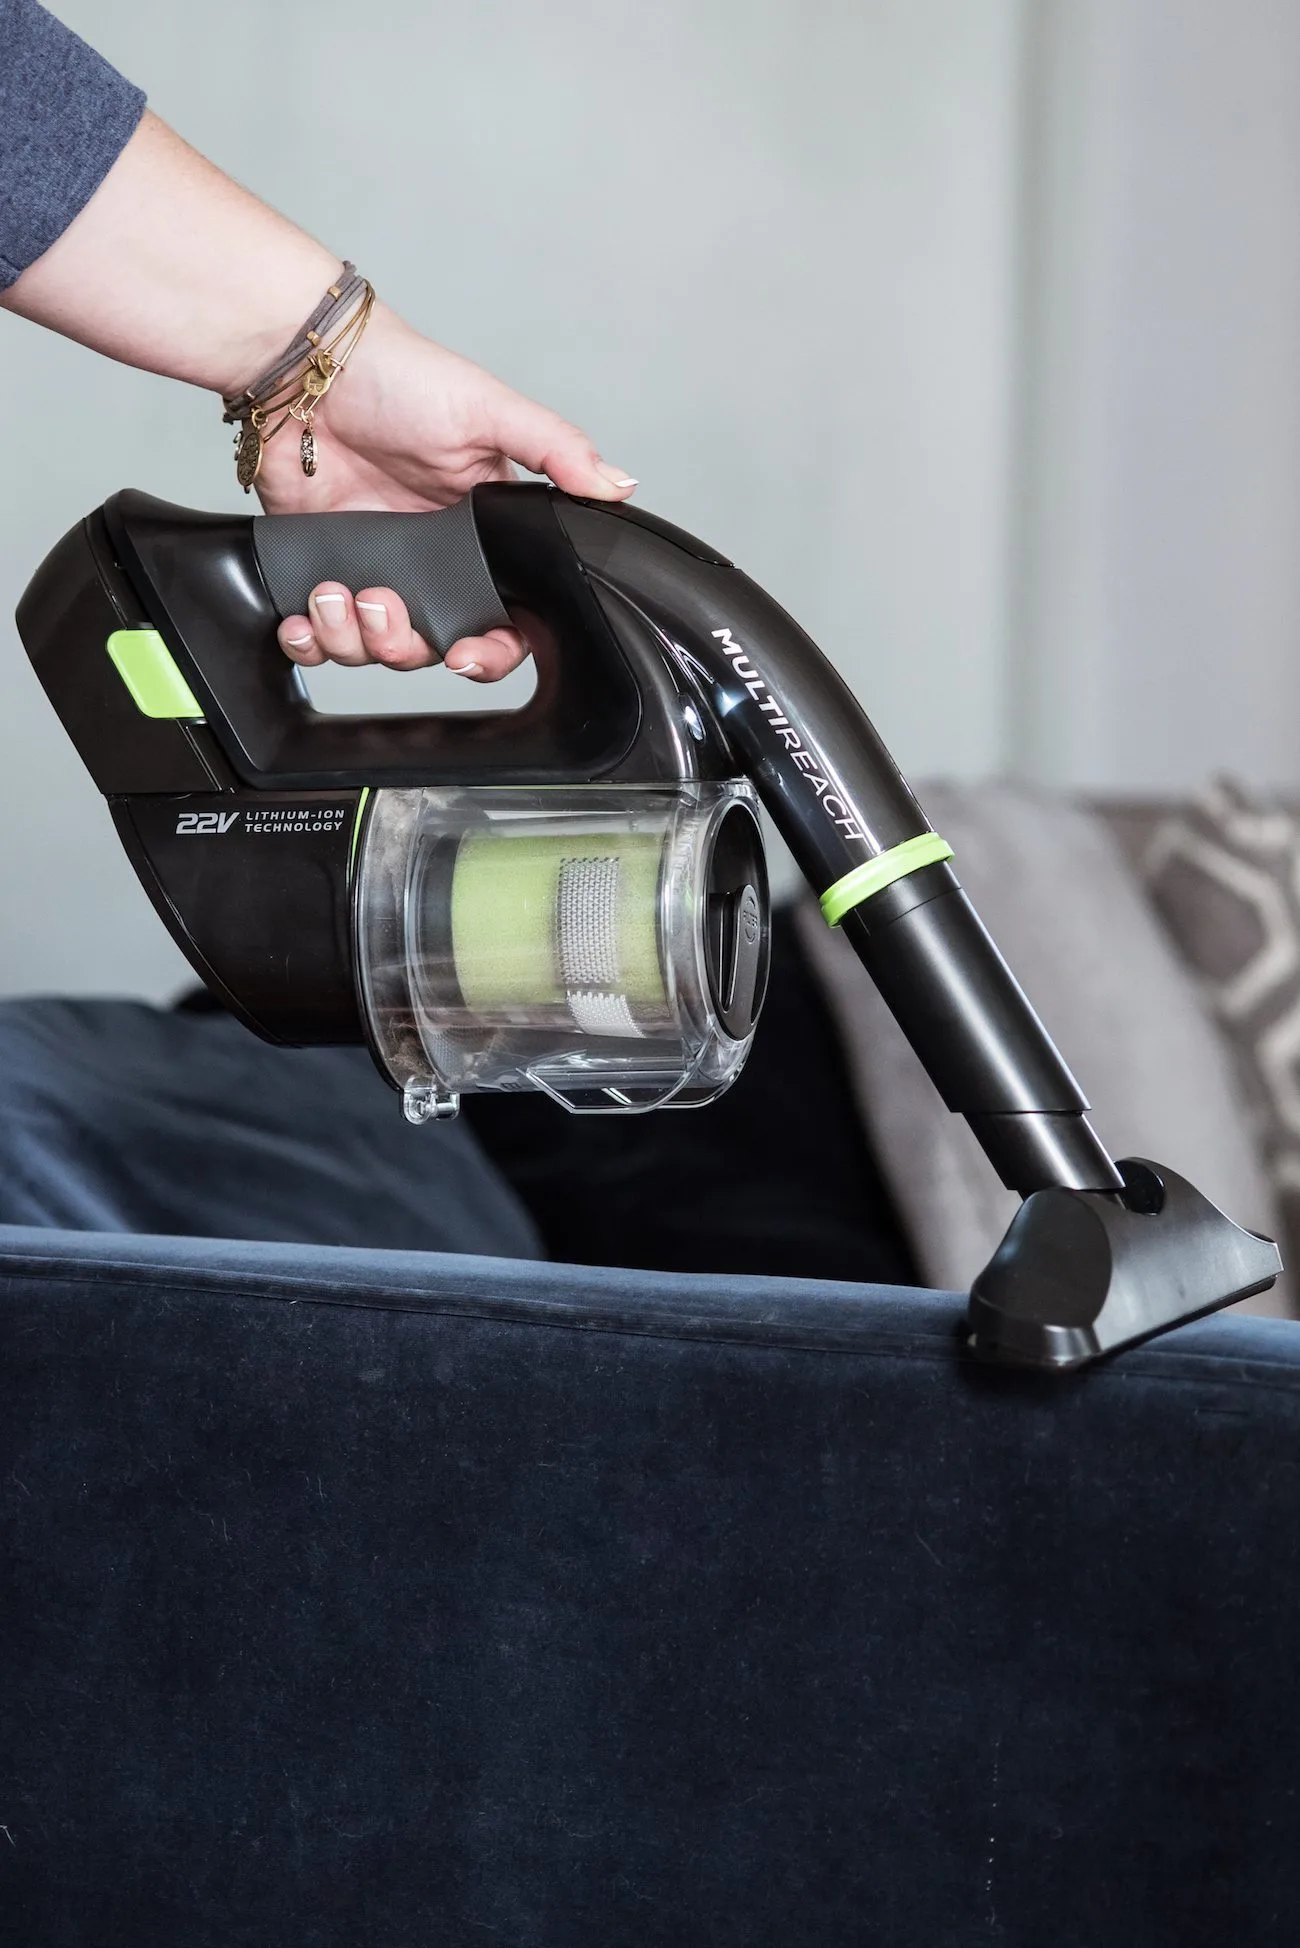 Bissell Multi Reach Cordless Vacuum Review | How to Prep Your Home for the Holidays | Holiday entertaining ideas, entertaining tips, party ideas, party appetizers and more from @cydconverse